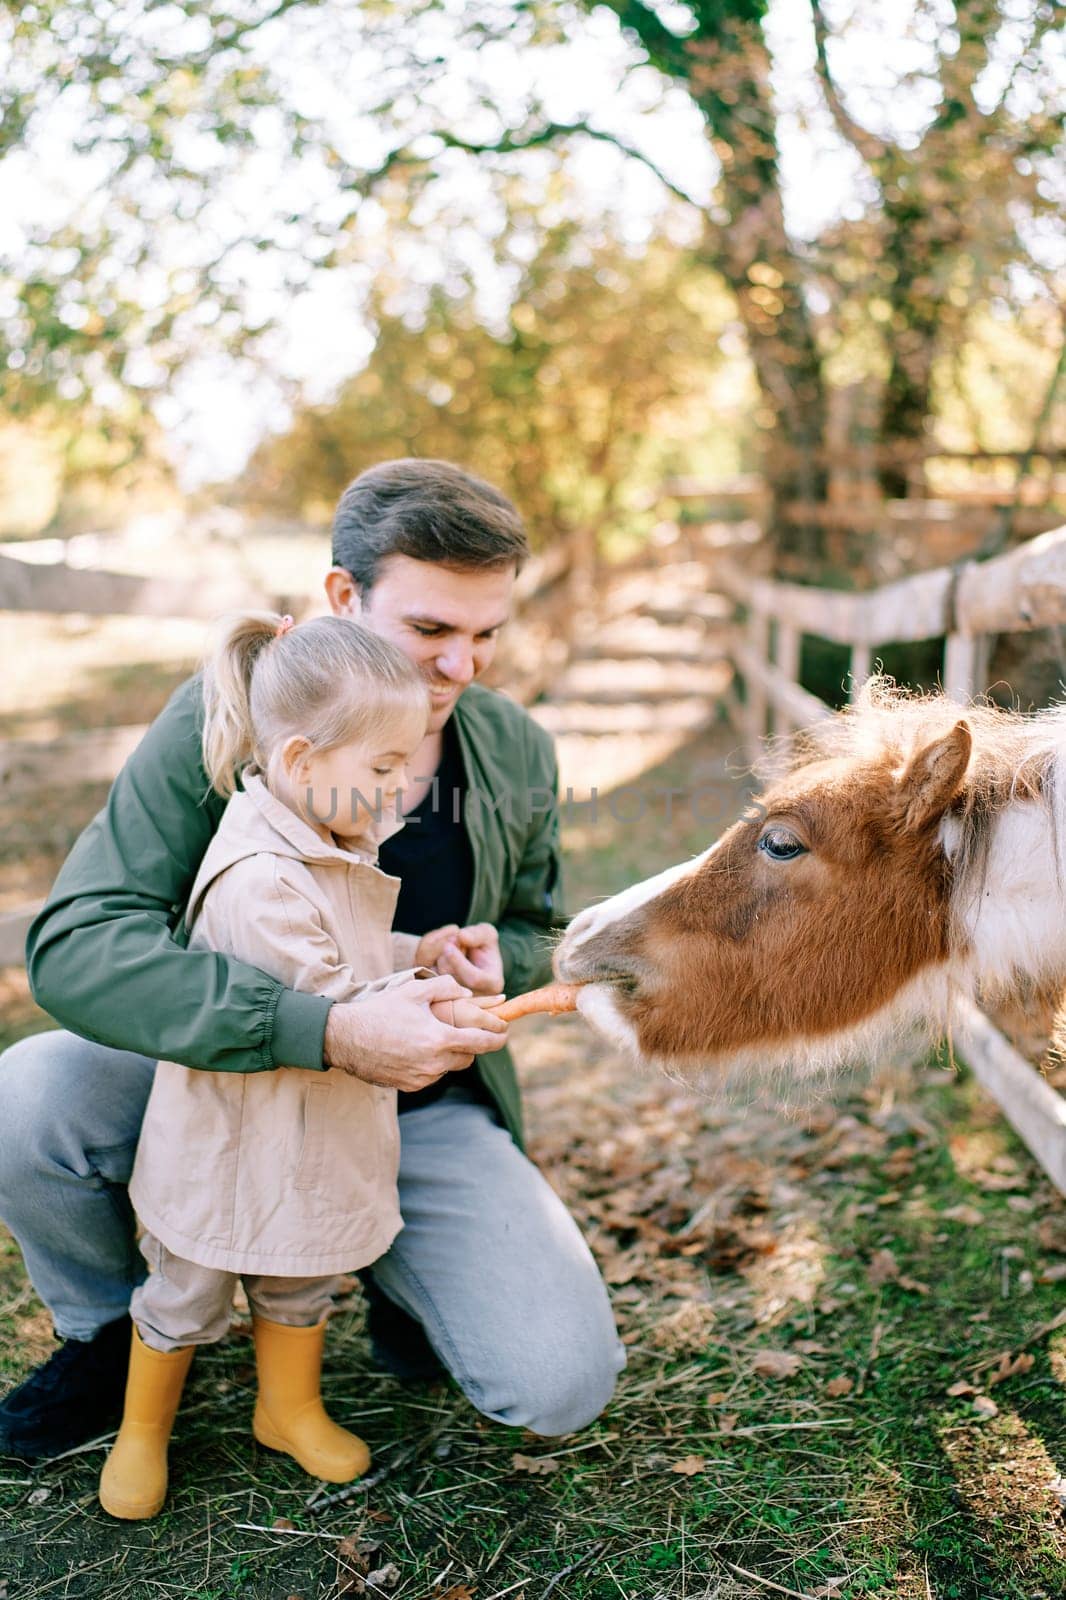 Smiling dad holding hand of little girl feeding pony through fence in park. High quality photo